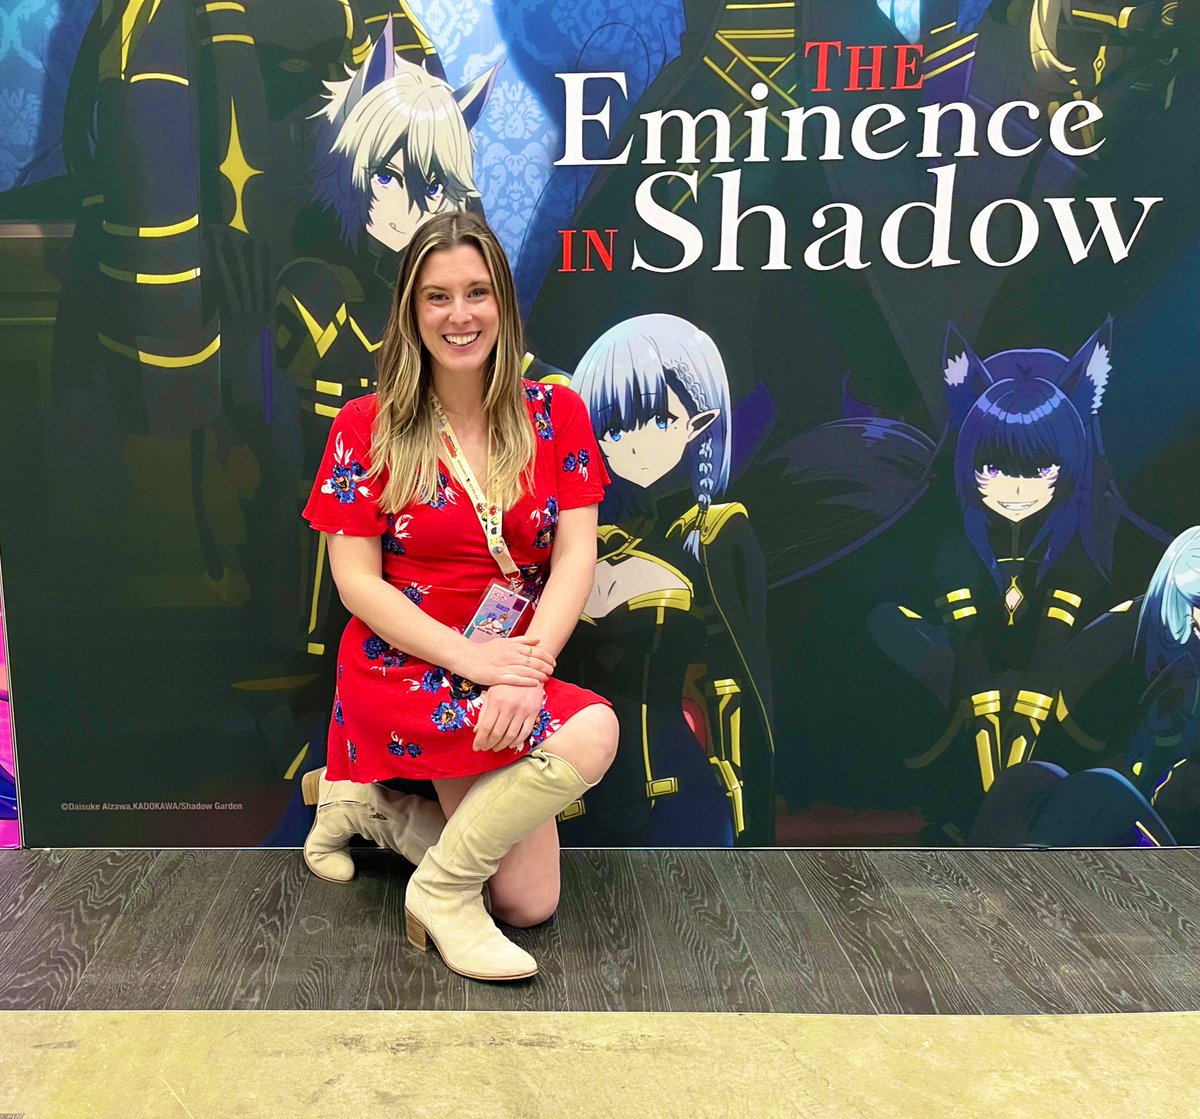 My girl Beta 😍😍😍 can’t wait to talk about my love for our show #eminenceinshadow at tomorrow’s panel! See you tomorrow #AnimeBoston23 @AnimeBoston @HIDIVEofficial